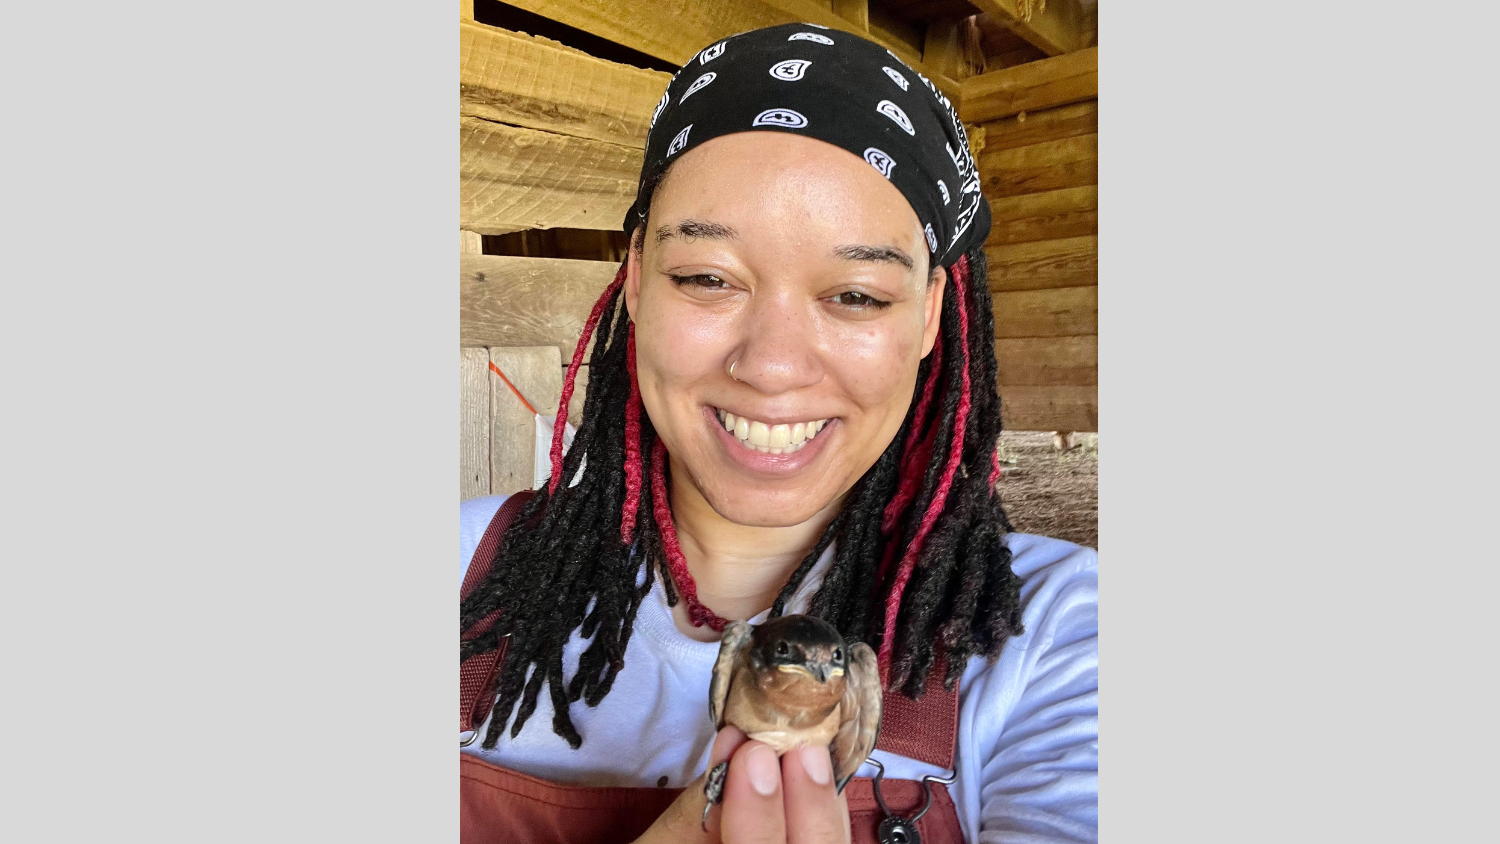 Murry holds bird - NC State student Murry Burgess to Publish Children's Book - College of Natural Resources News NC State University